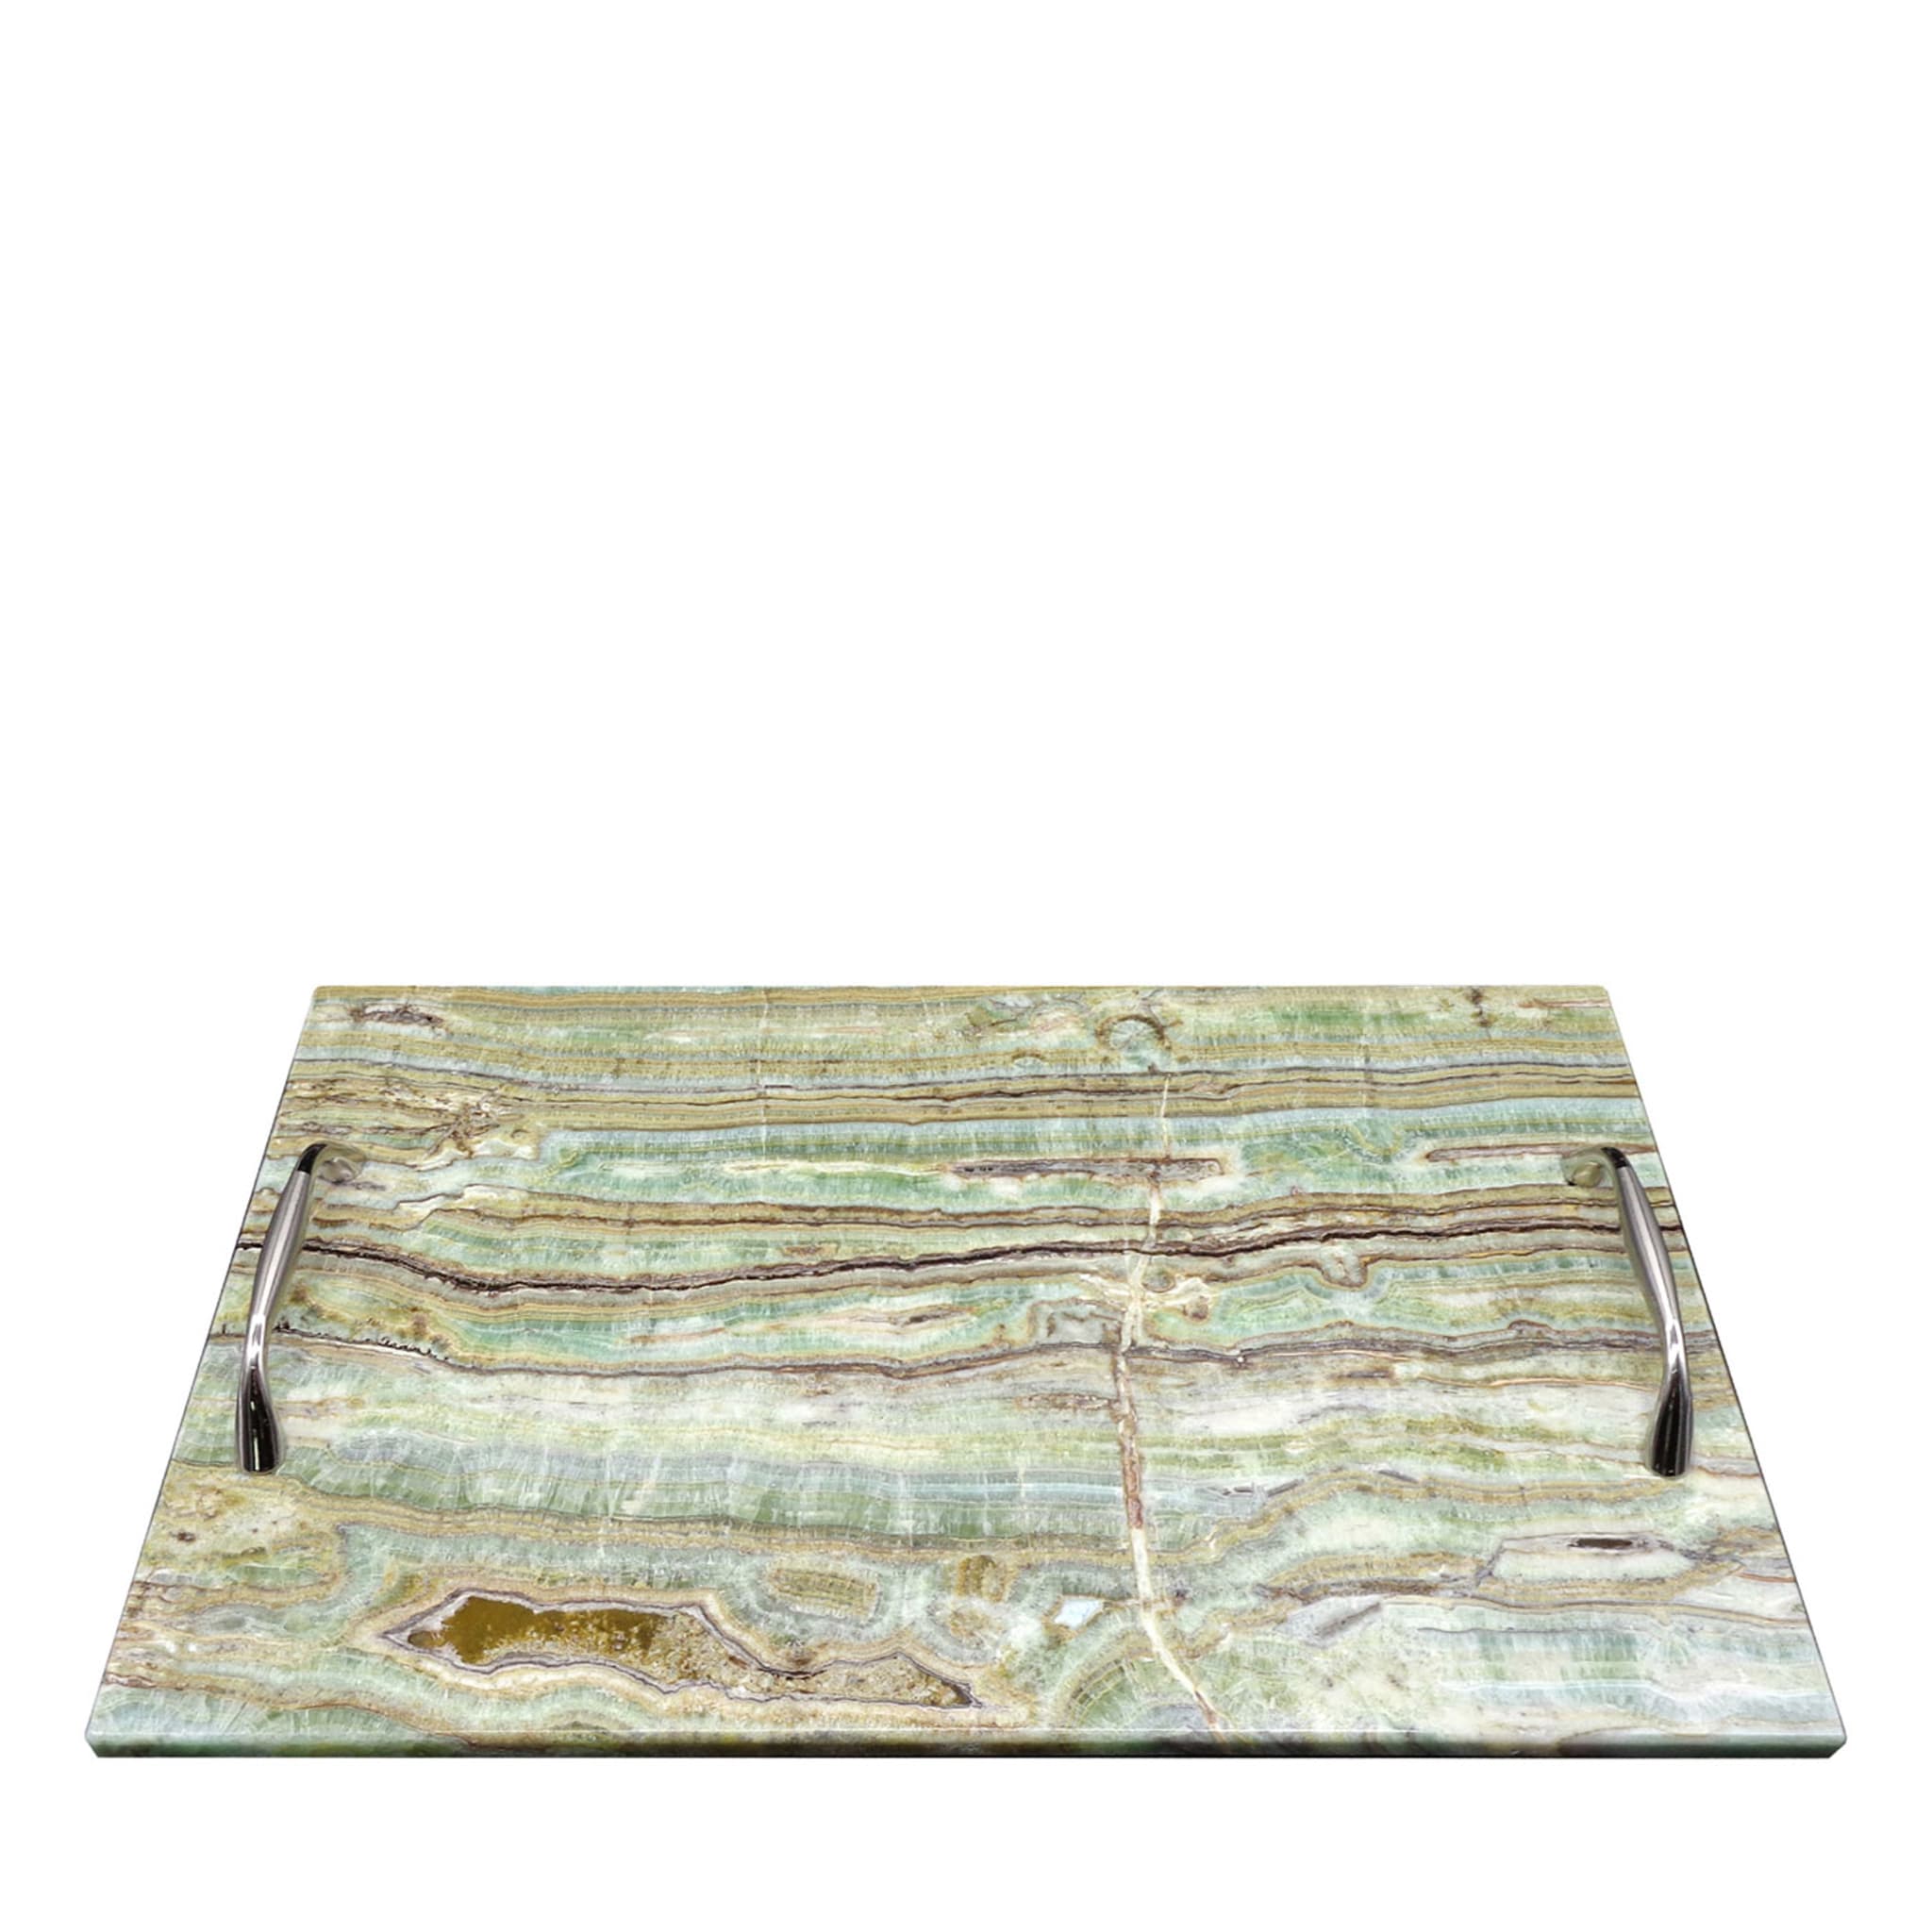 Rectangular Emerald Onyx Tray with Steel Handles #3 - Main view